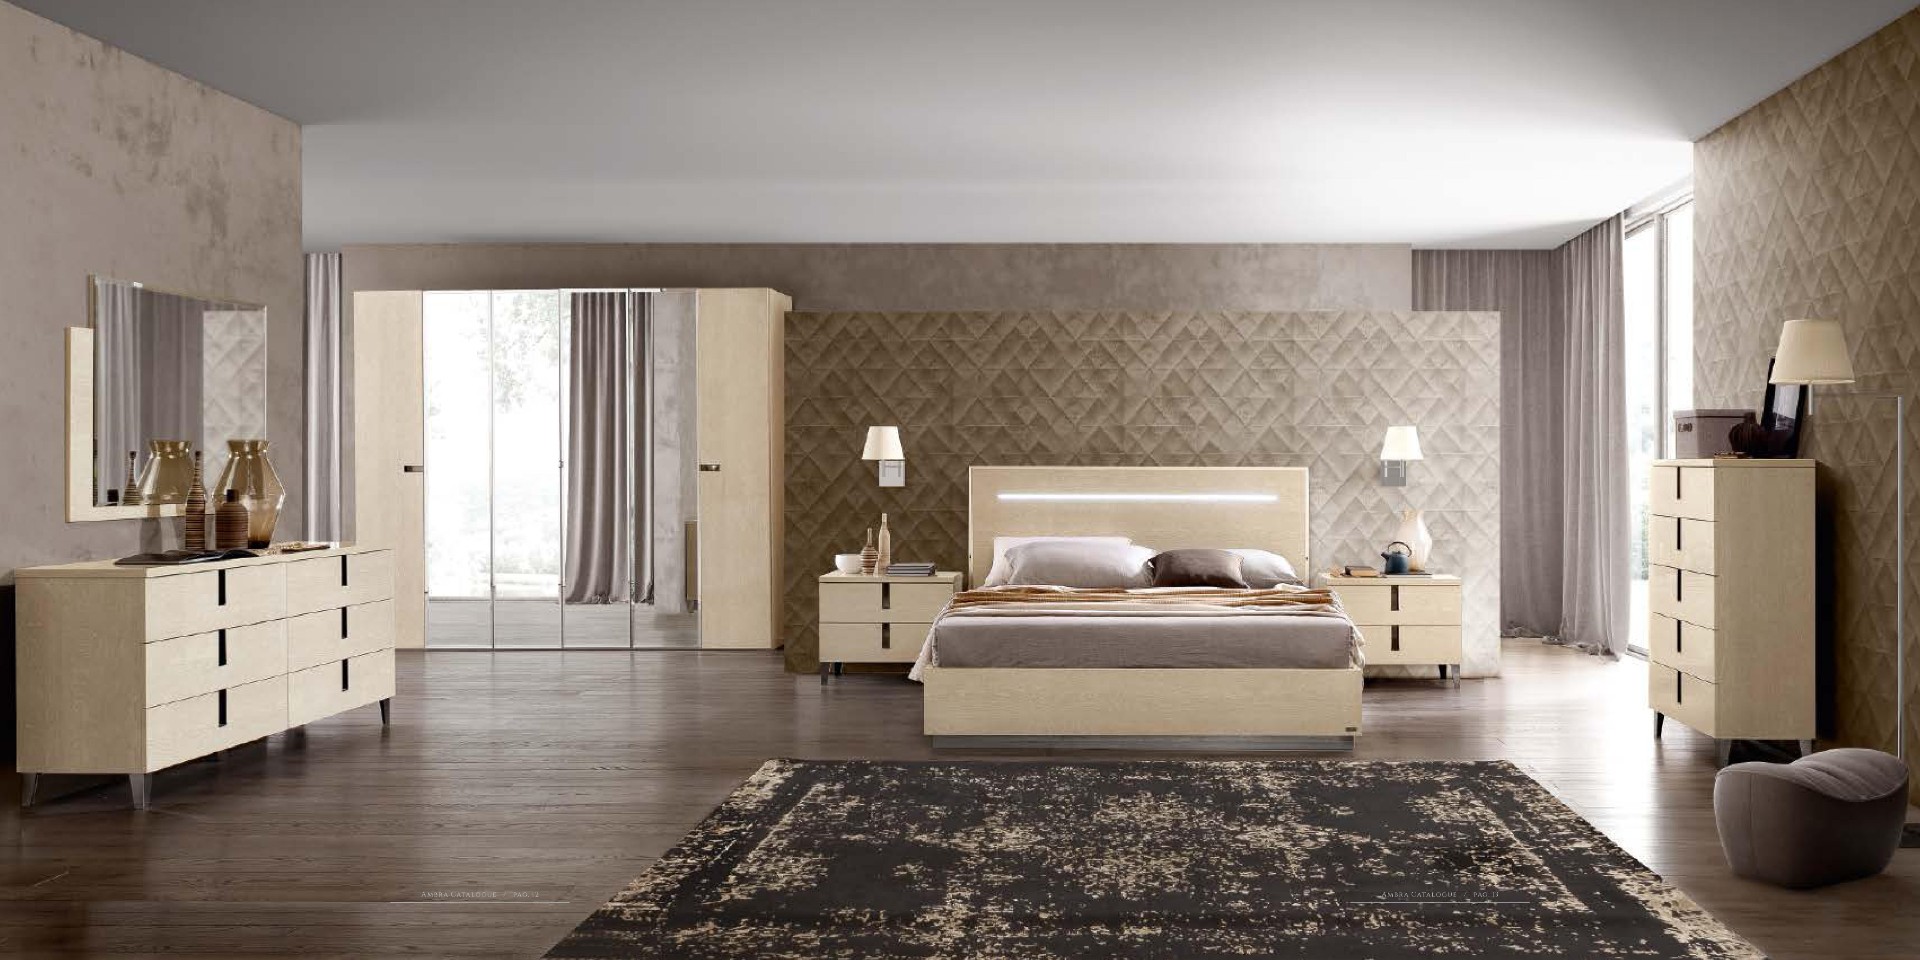 modern bedroom furniture for small spaces from italy